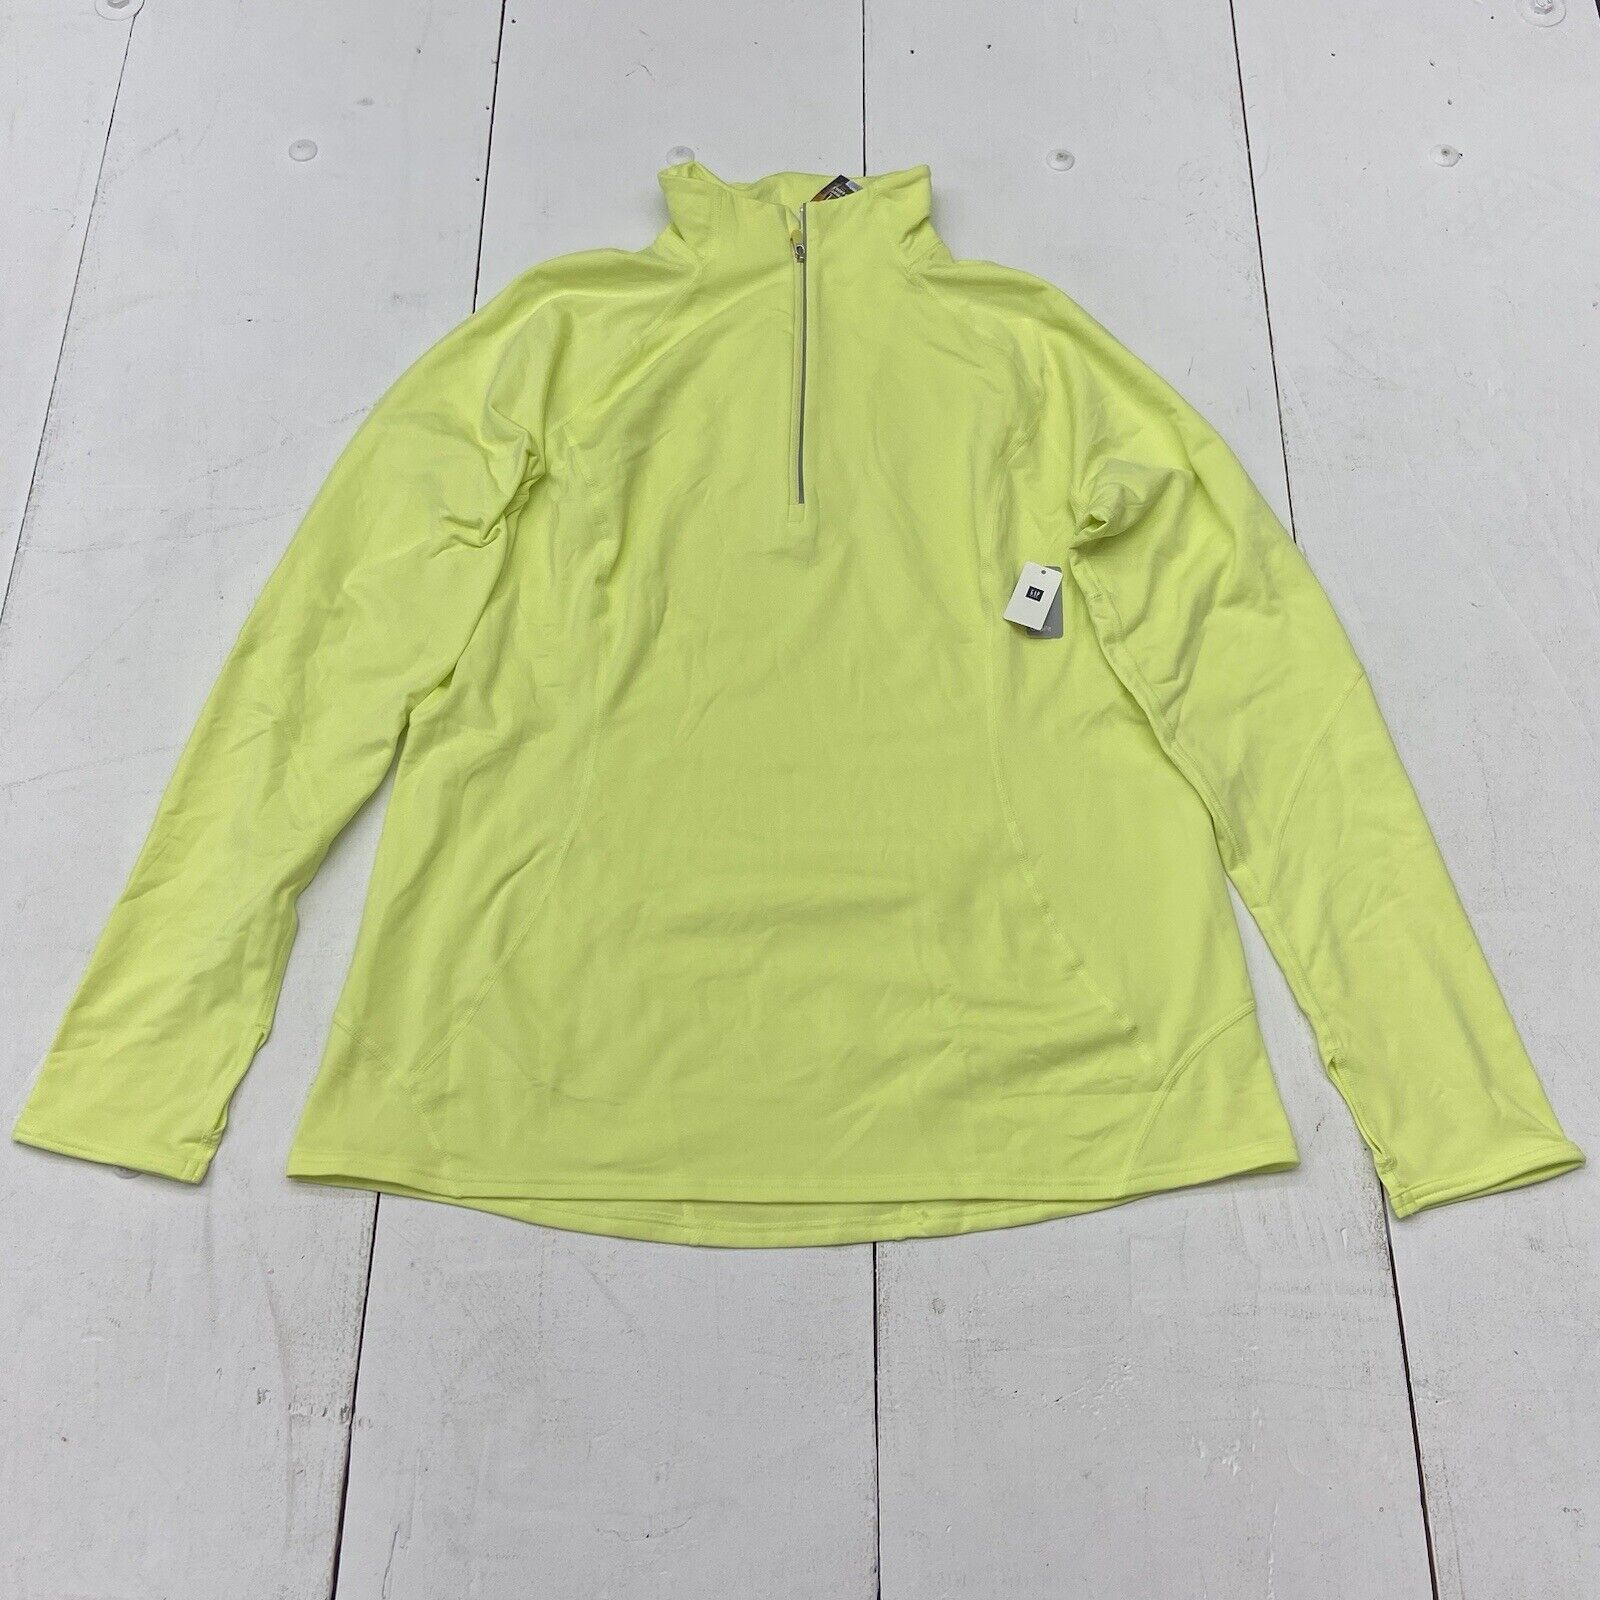 GAP Fit Sunny Lime Long Sleeve 1/2 Zip Athletic Shirt Women Size